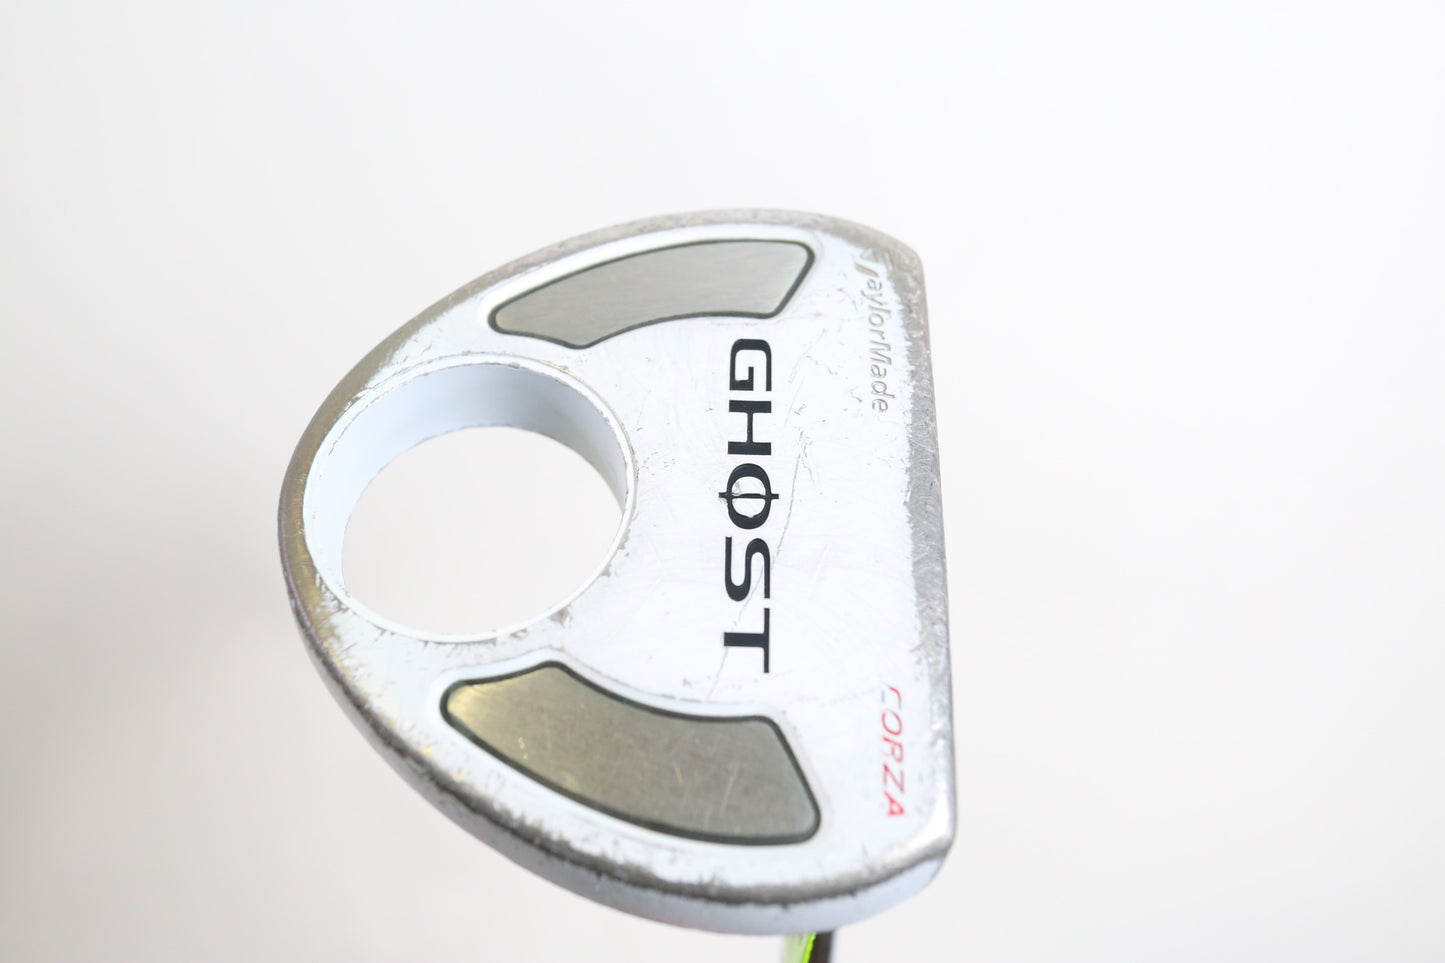 Used TaylorMade Corza Ghost Putter - Right-Handed - 35 in - Mallet-Next Round